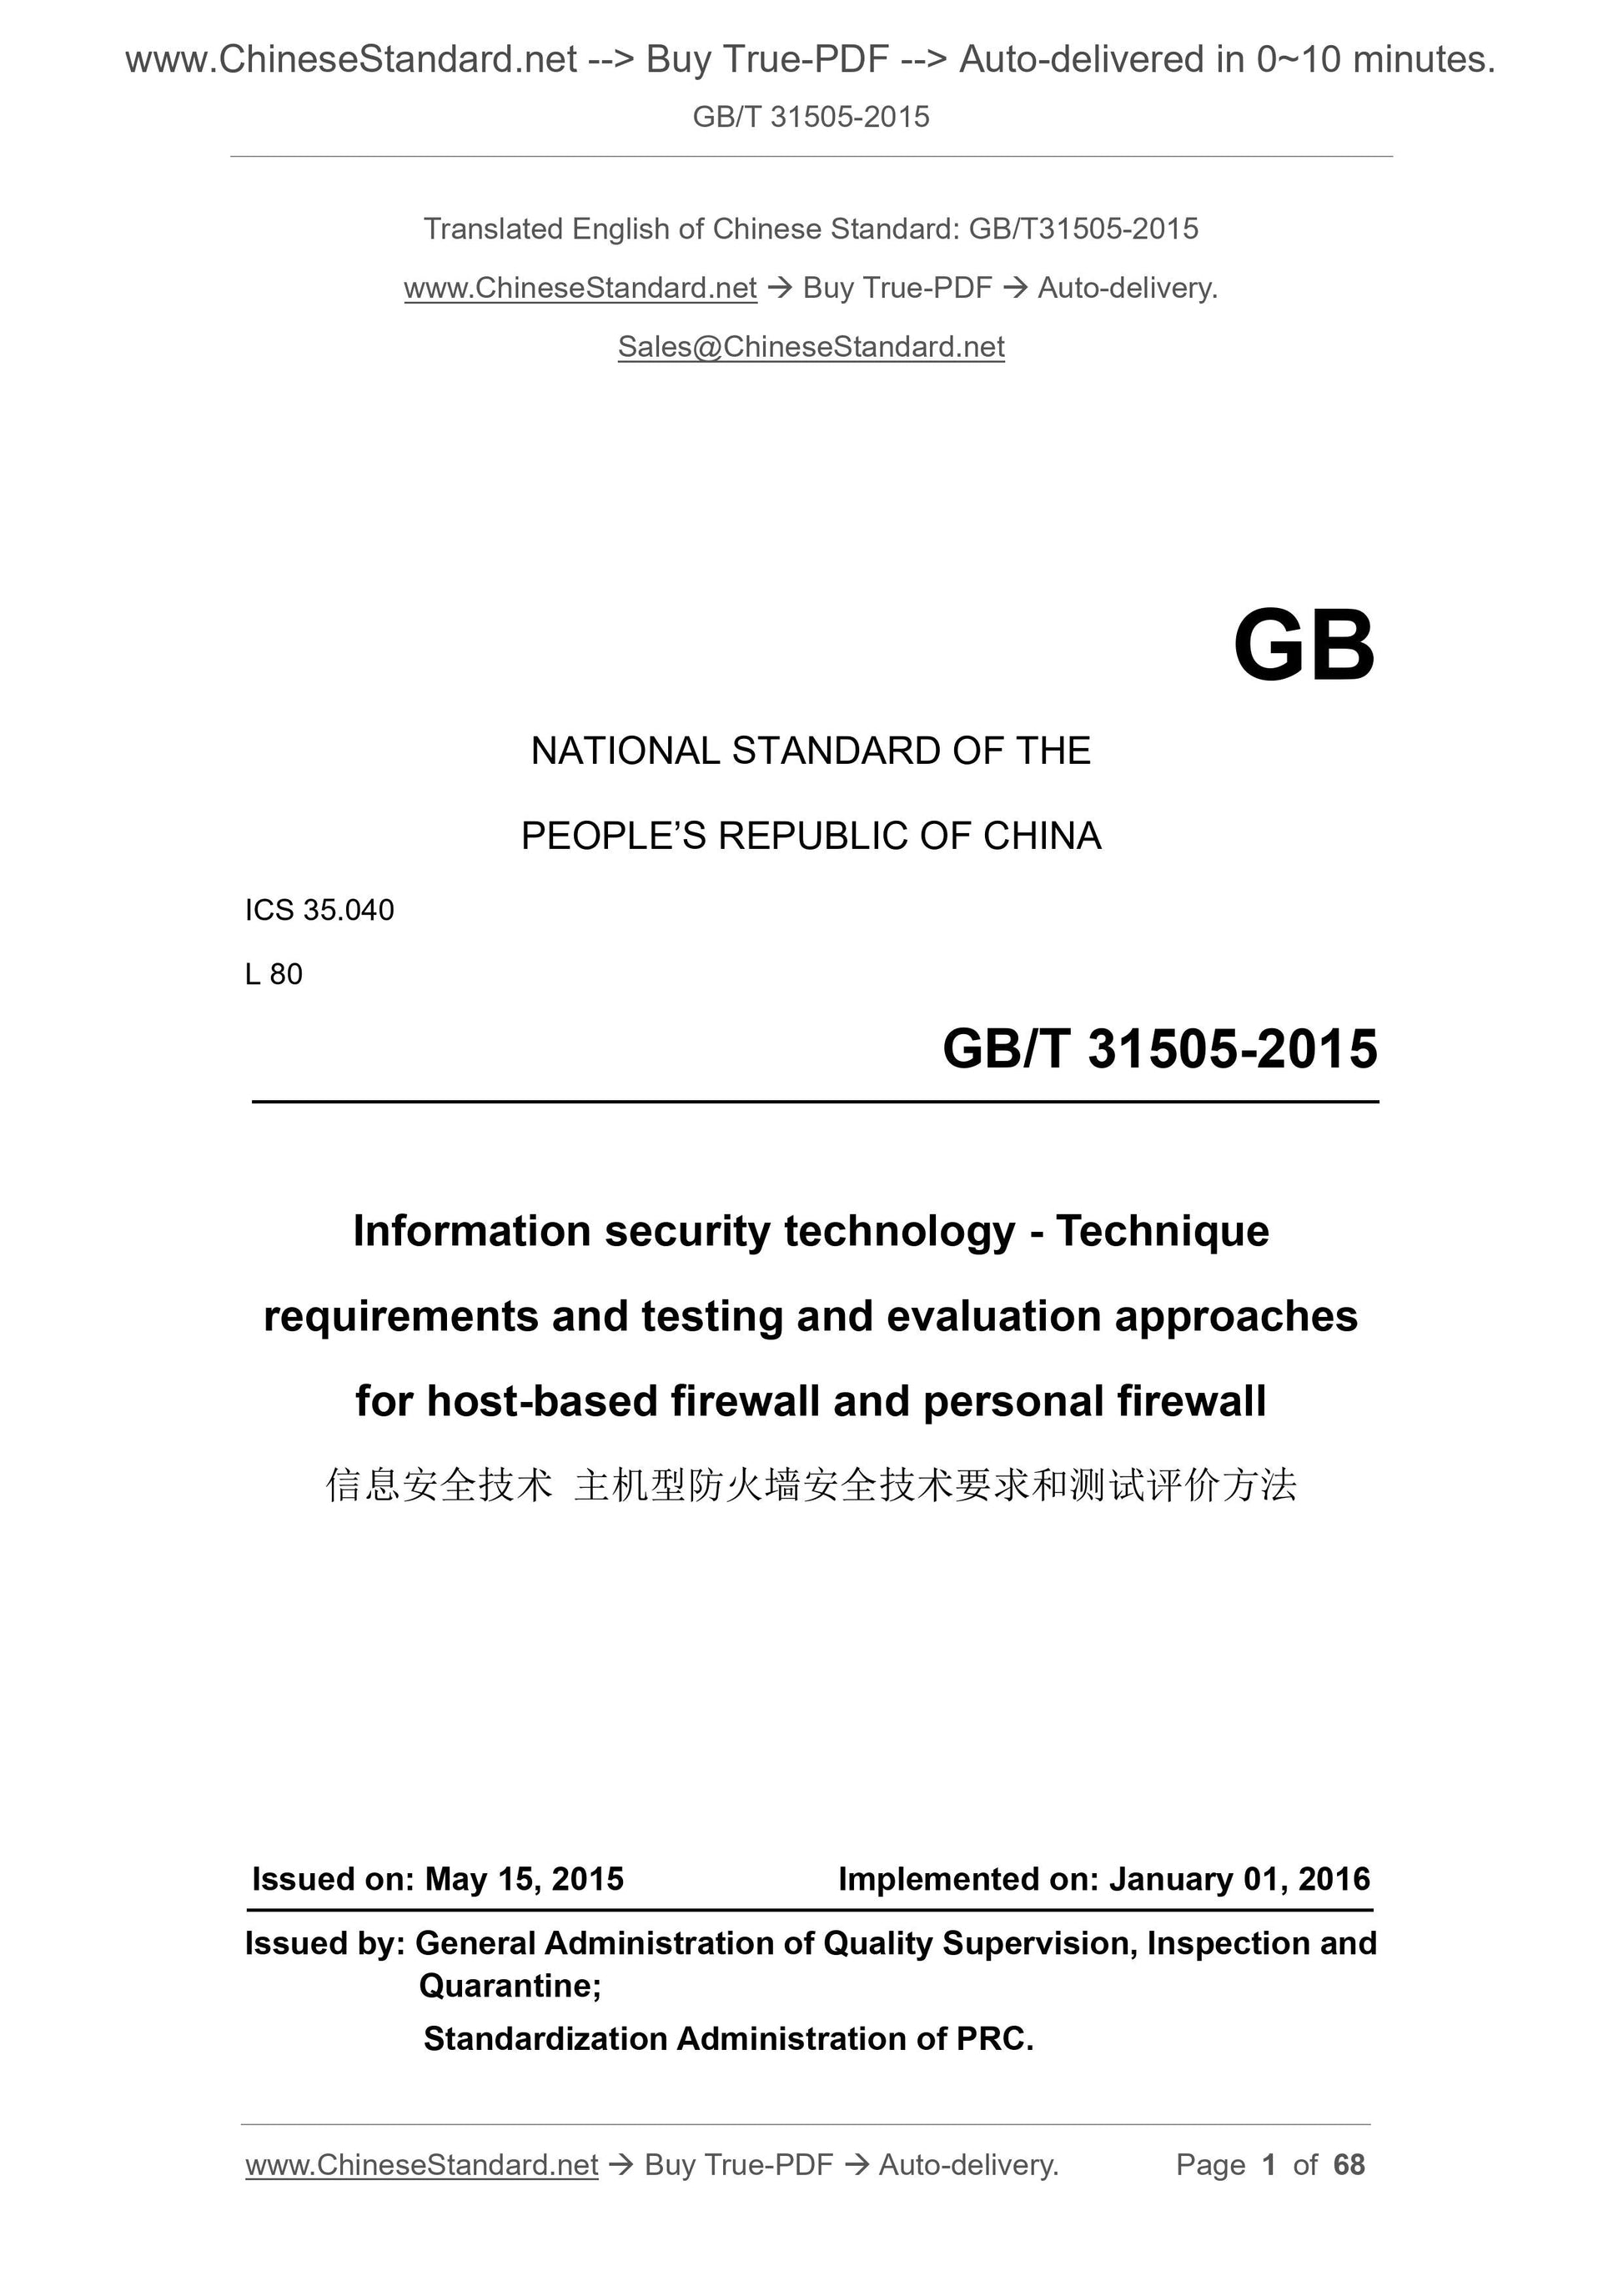 GB/T 31505-2015 Page 1